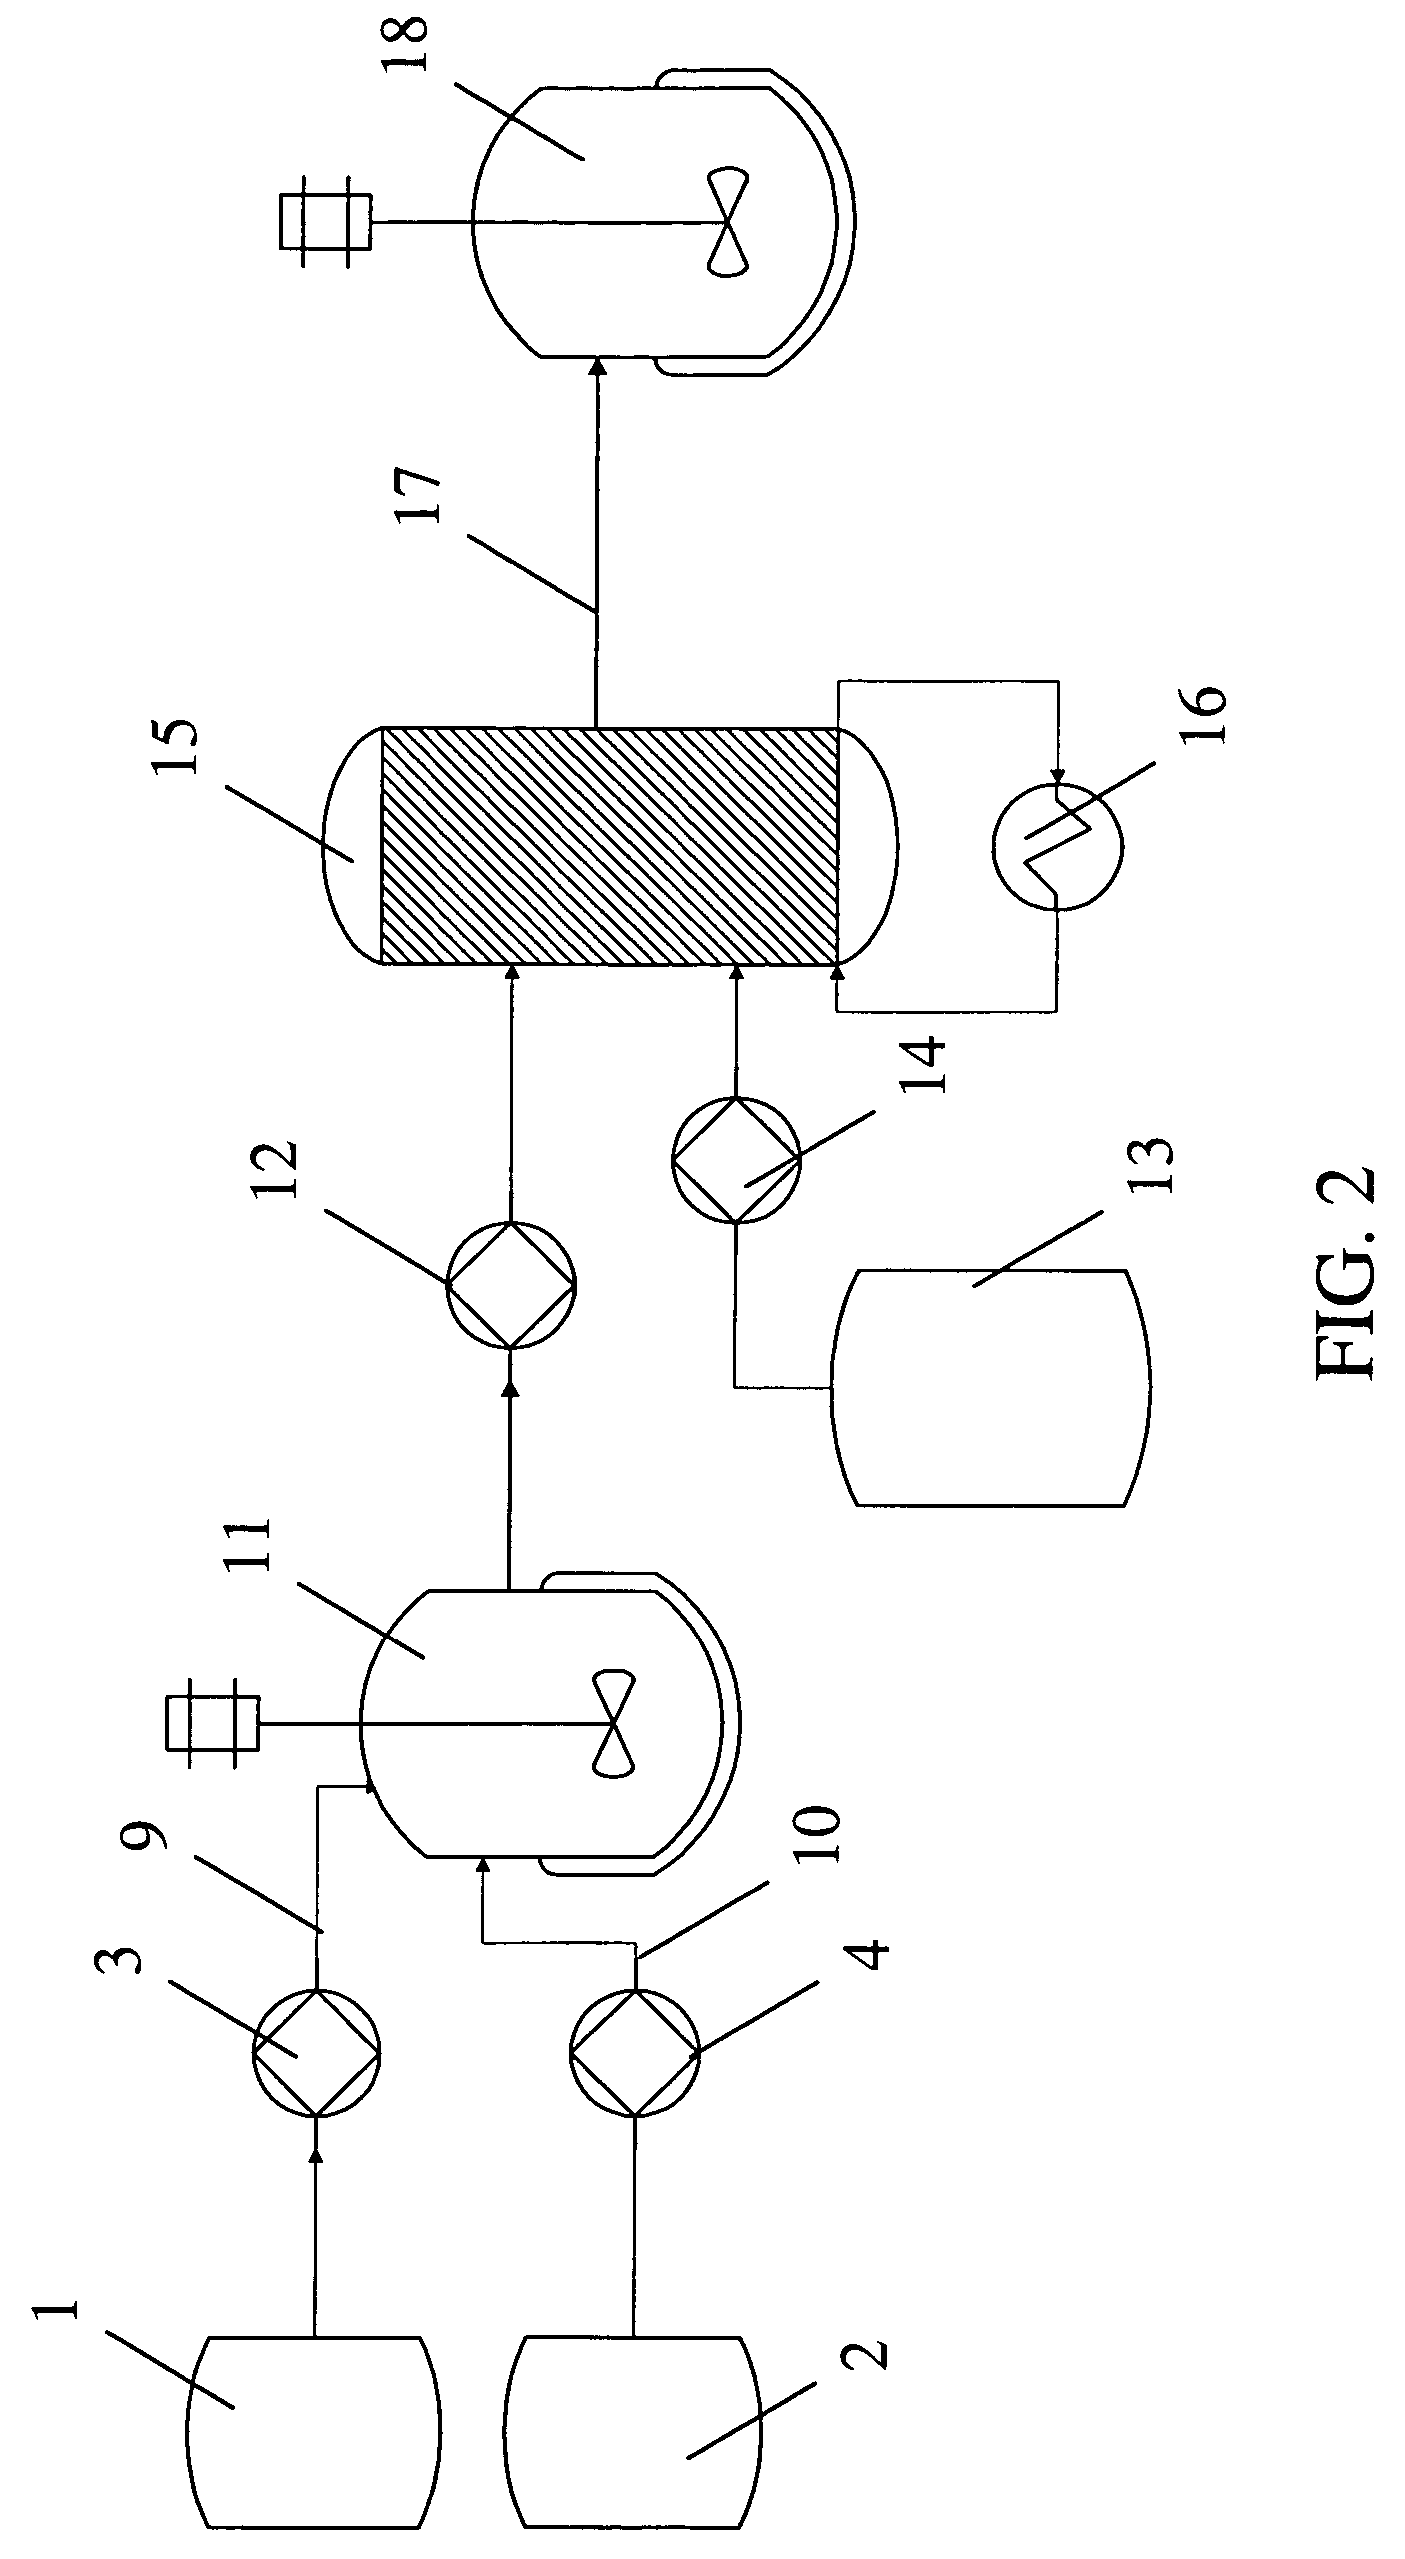 Non-cryogenic process for forming glycosides